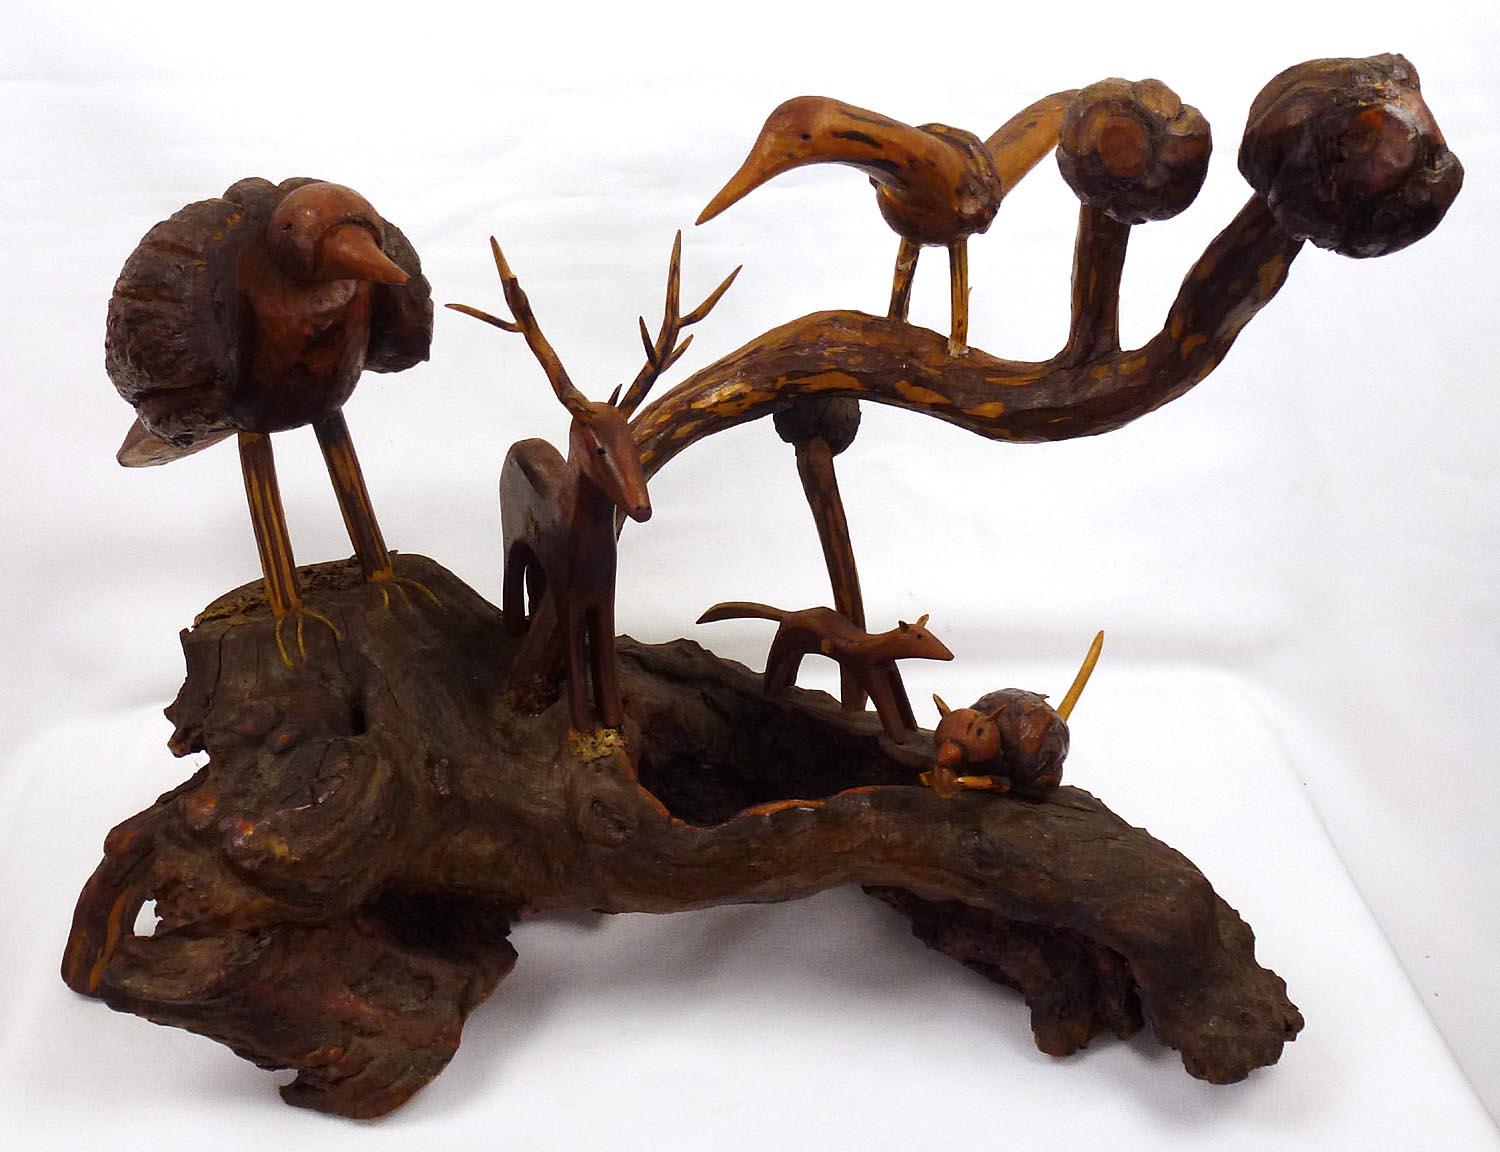 Assemblage of Carved Birds and Animals by the Outsider Artist Russell Gillespie 8